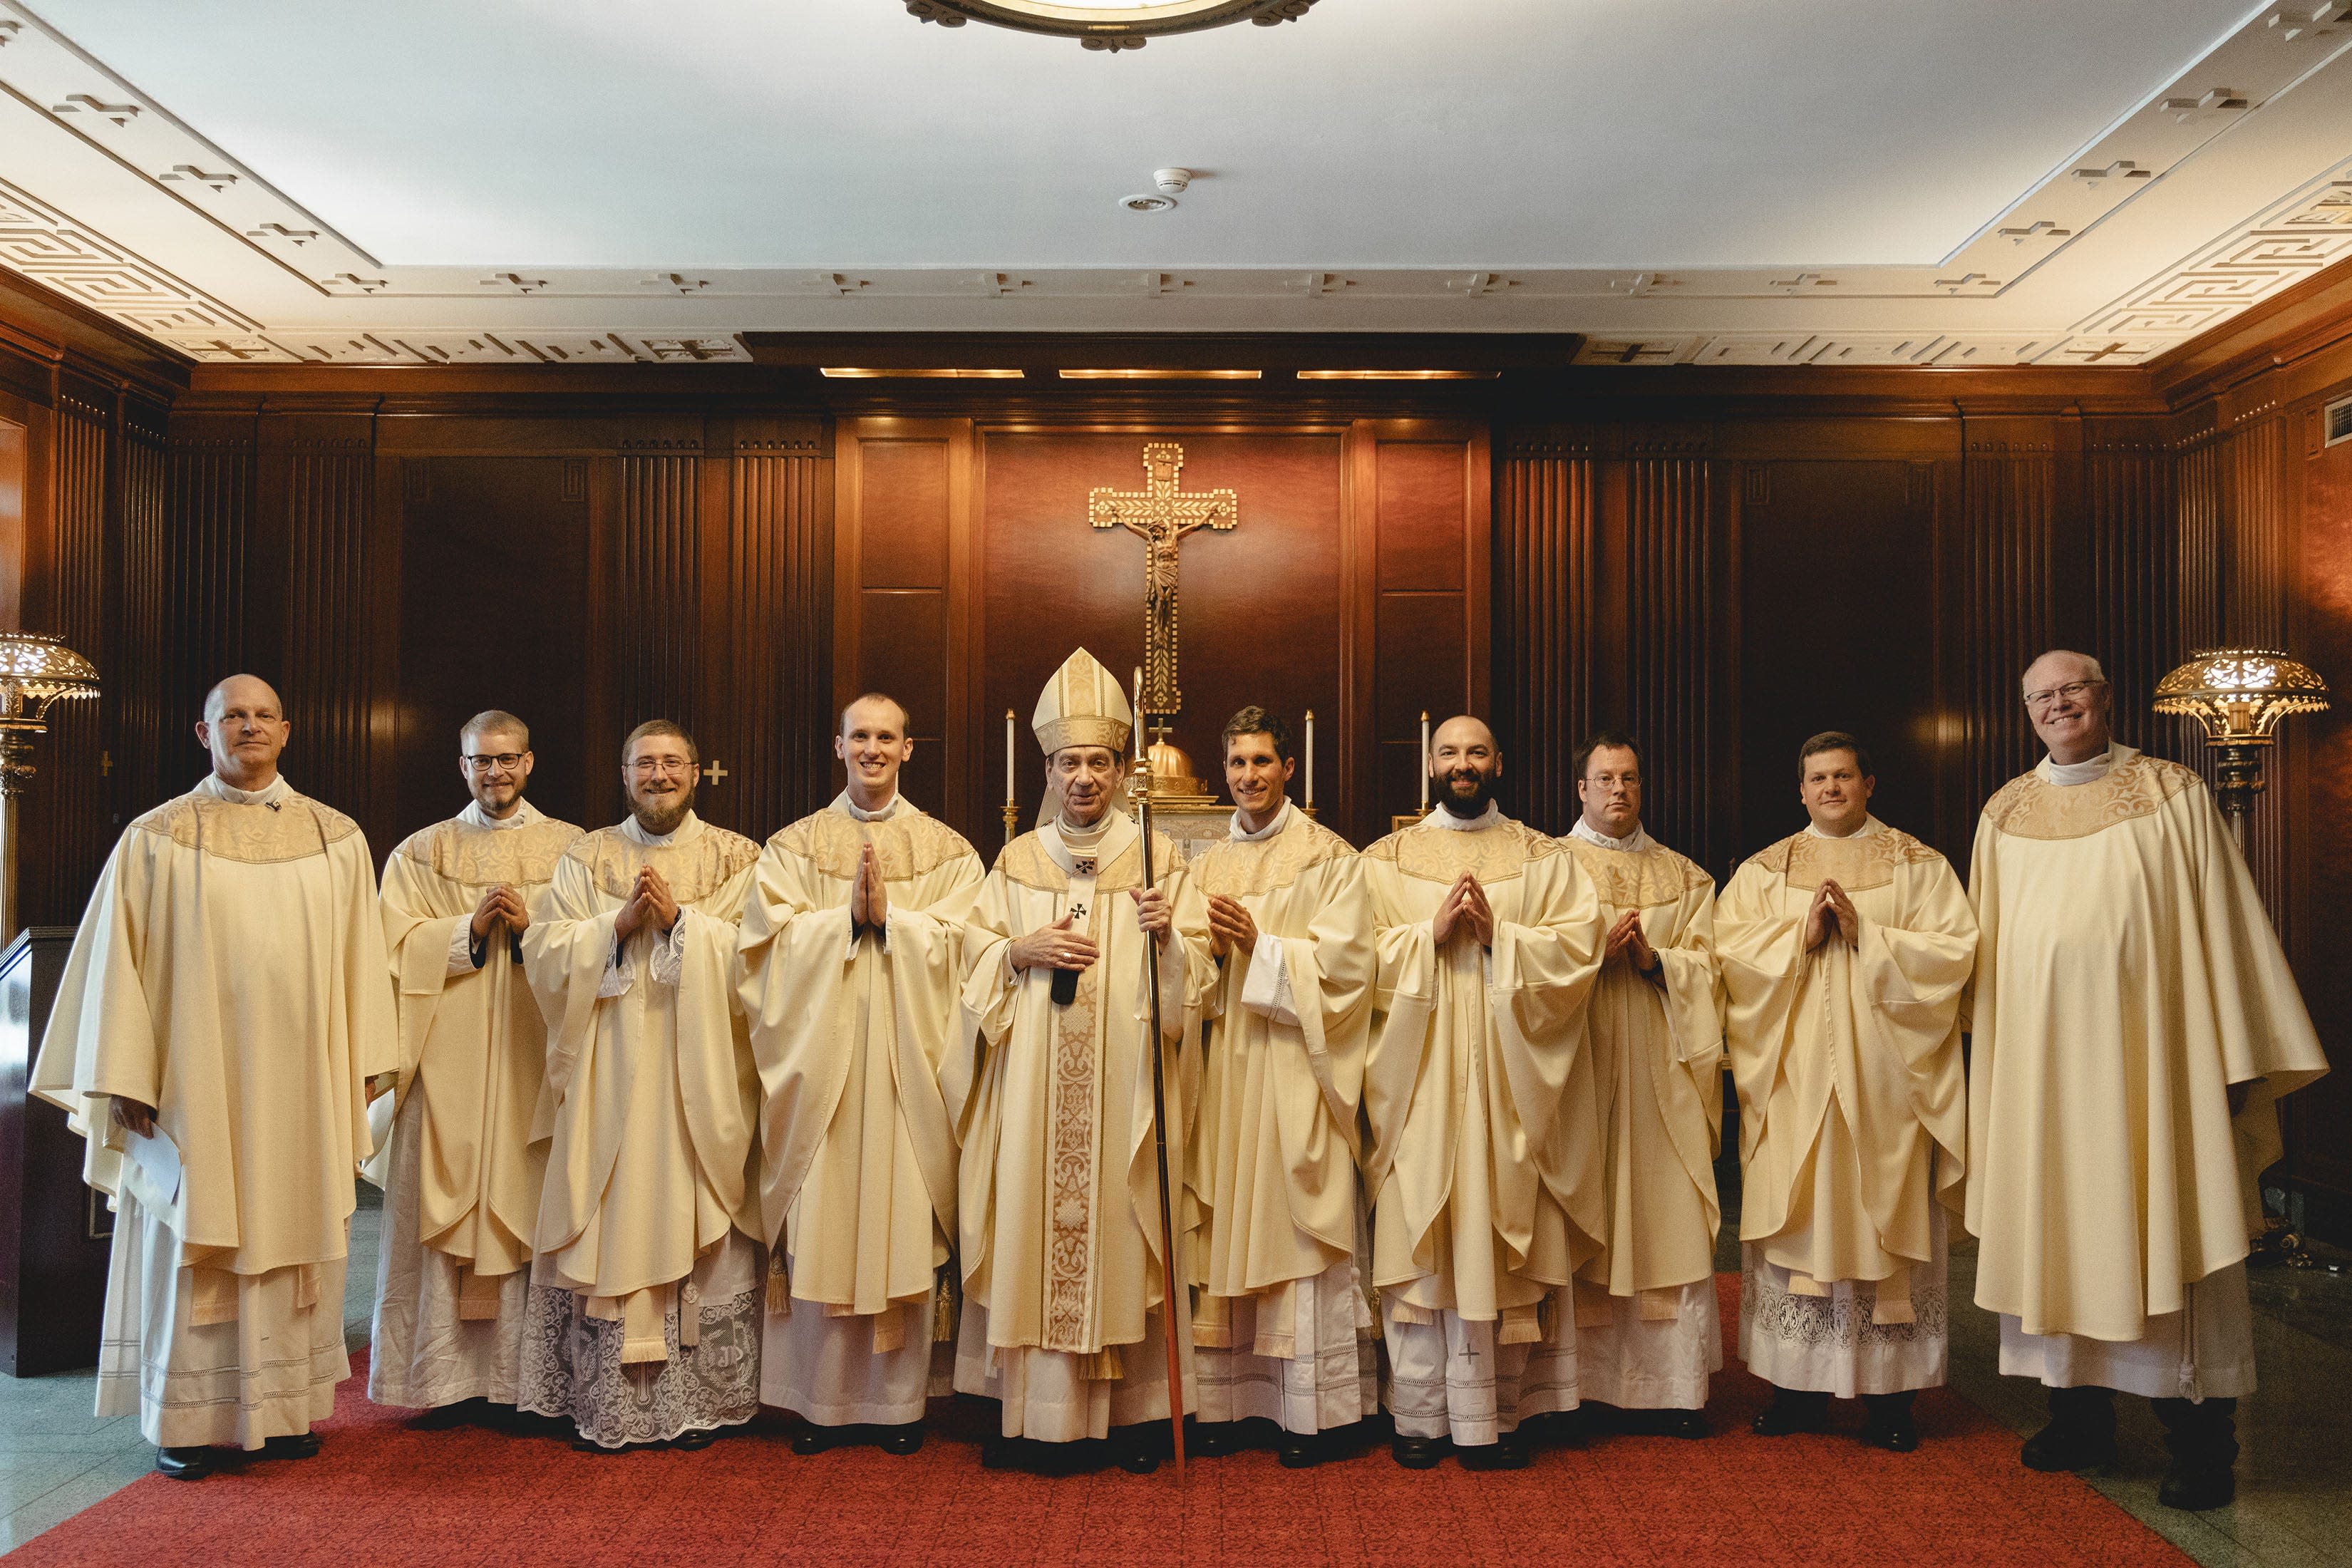 New priests ordained at the Archdiocese of Cincinnati, assigned to parishes